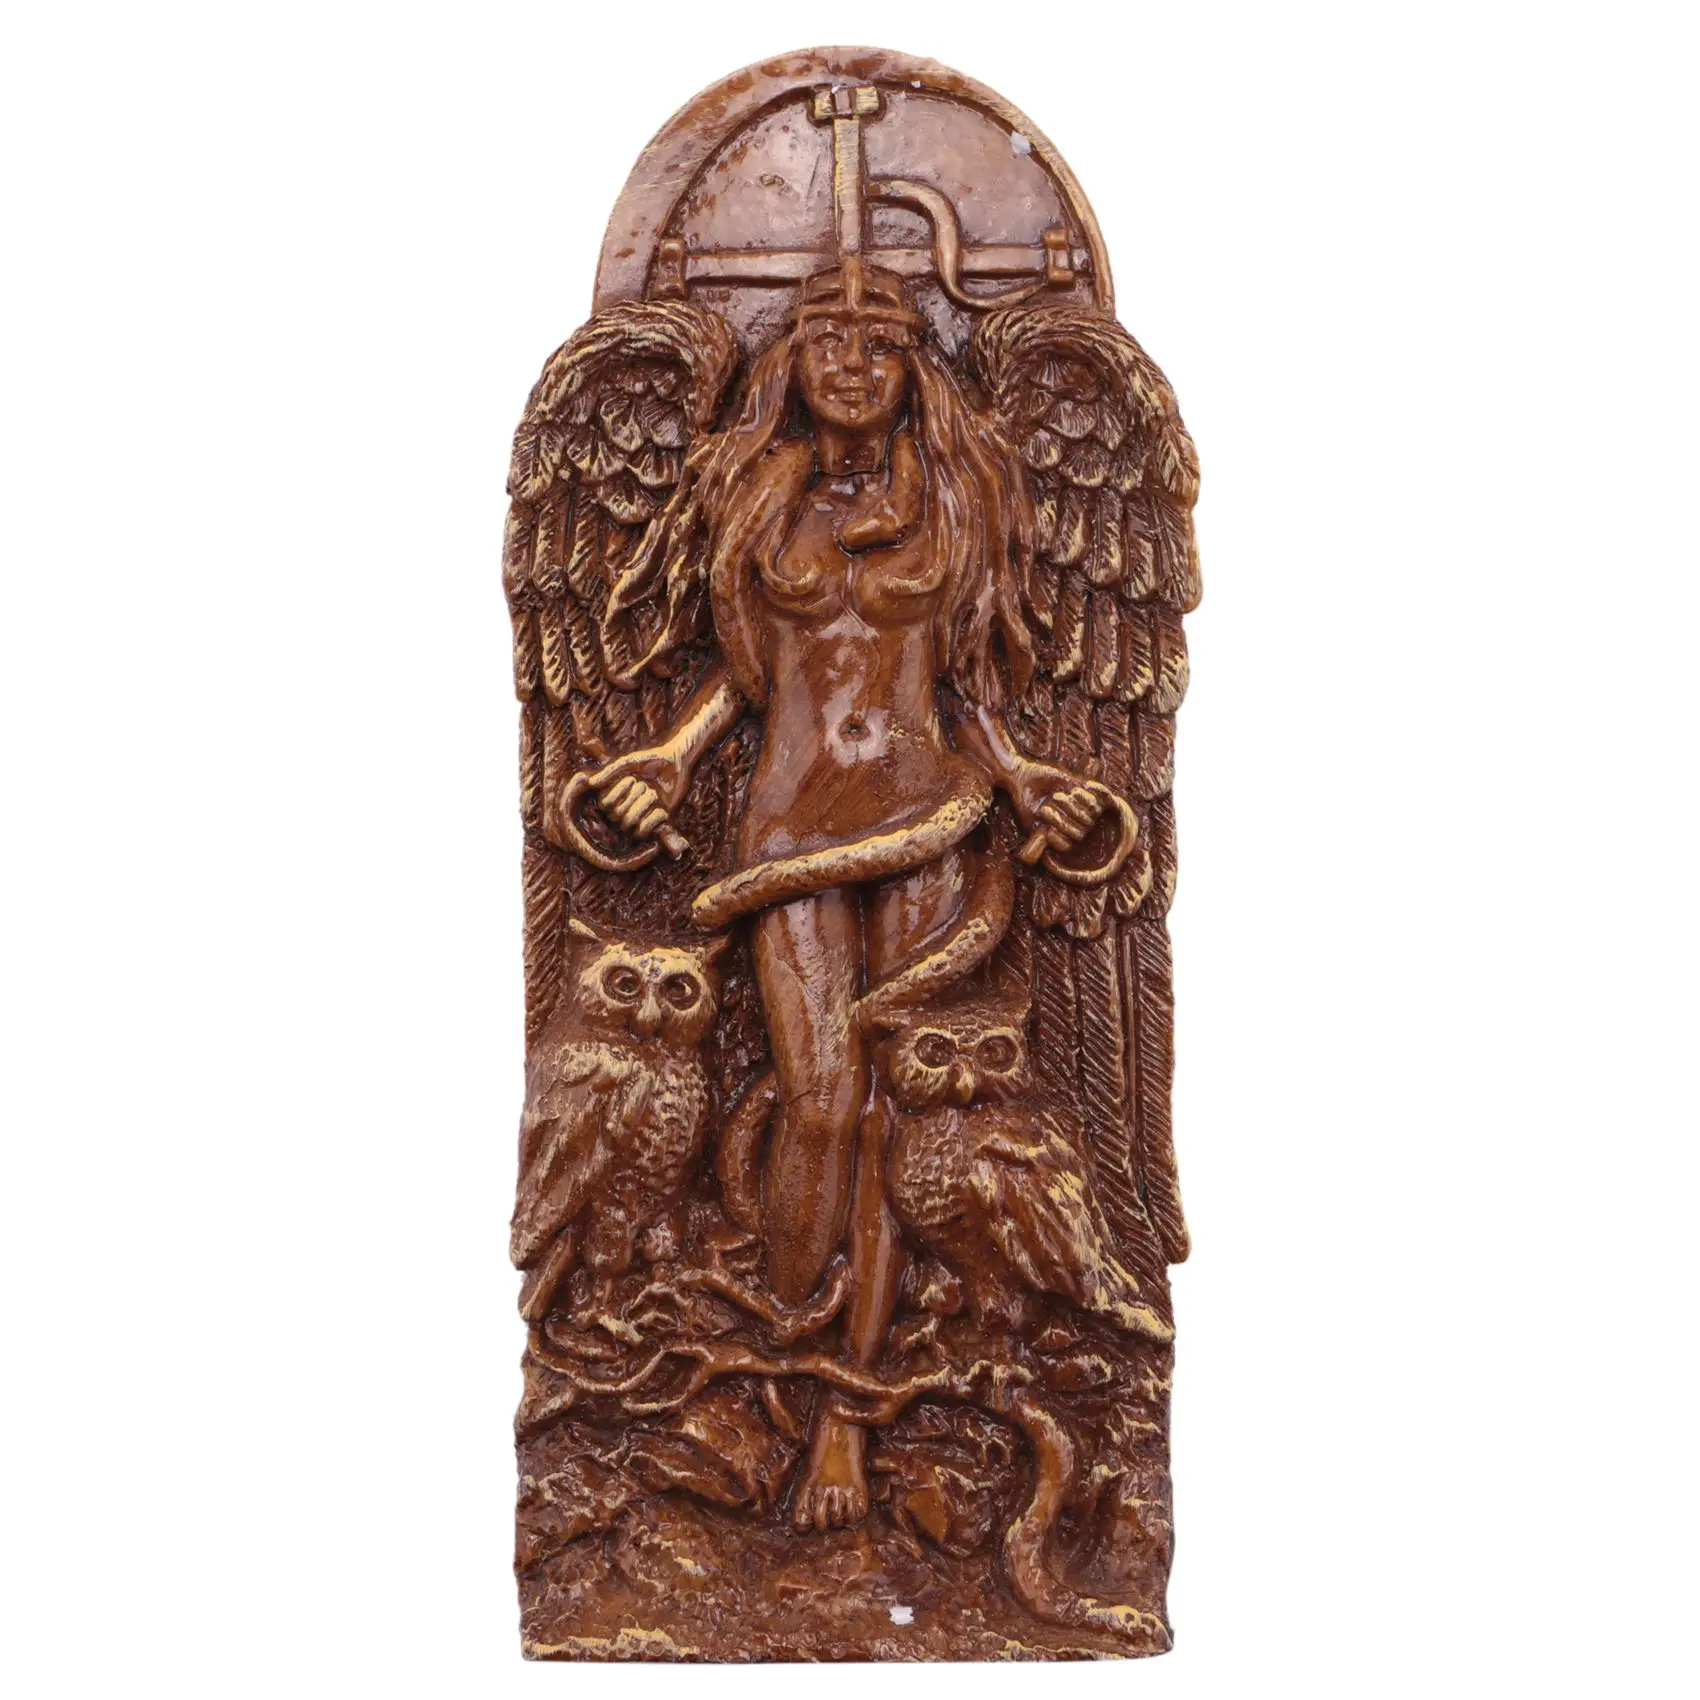 

Ancient Wiccan Goddess Statue Altar Sculpture Greek Goddess Statue Mythology Mother Earth Gaia Figurines for Pagan Home